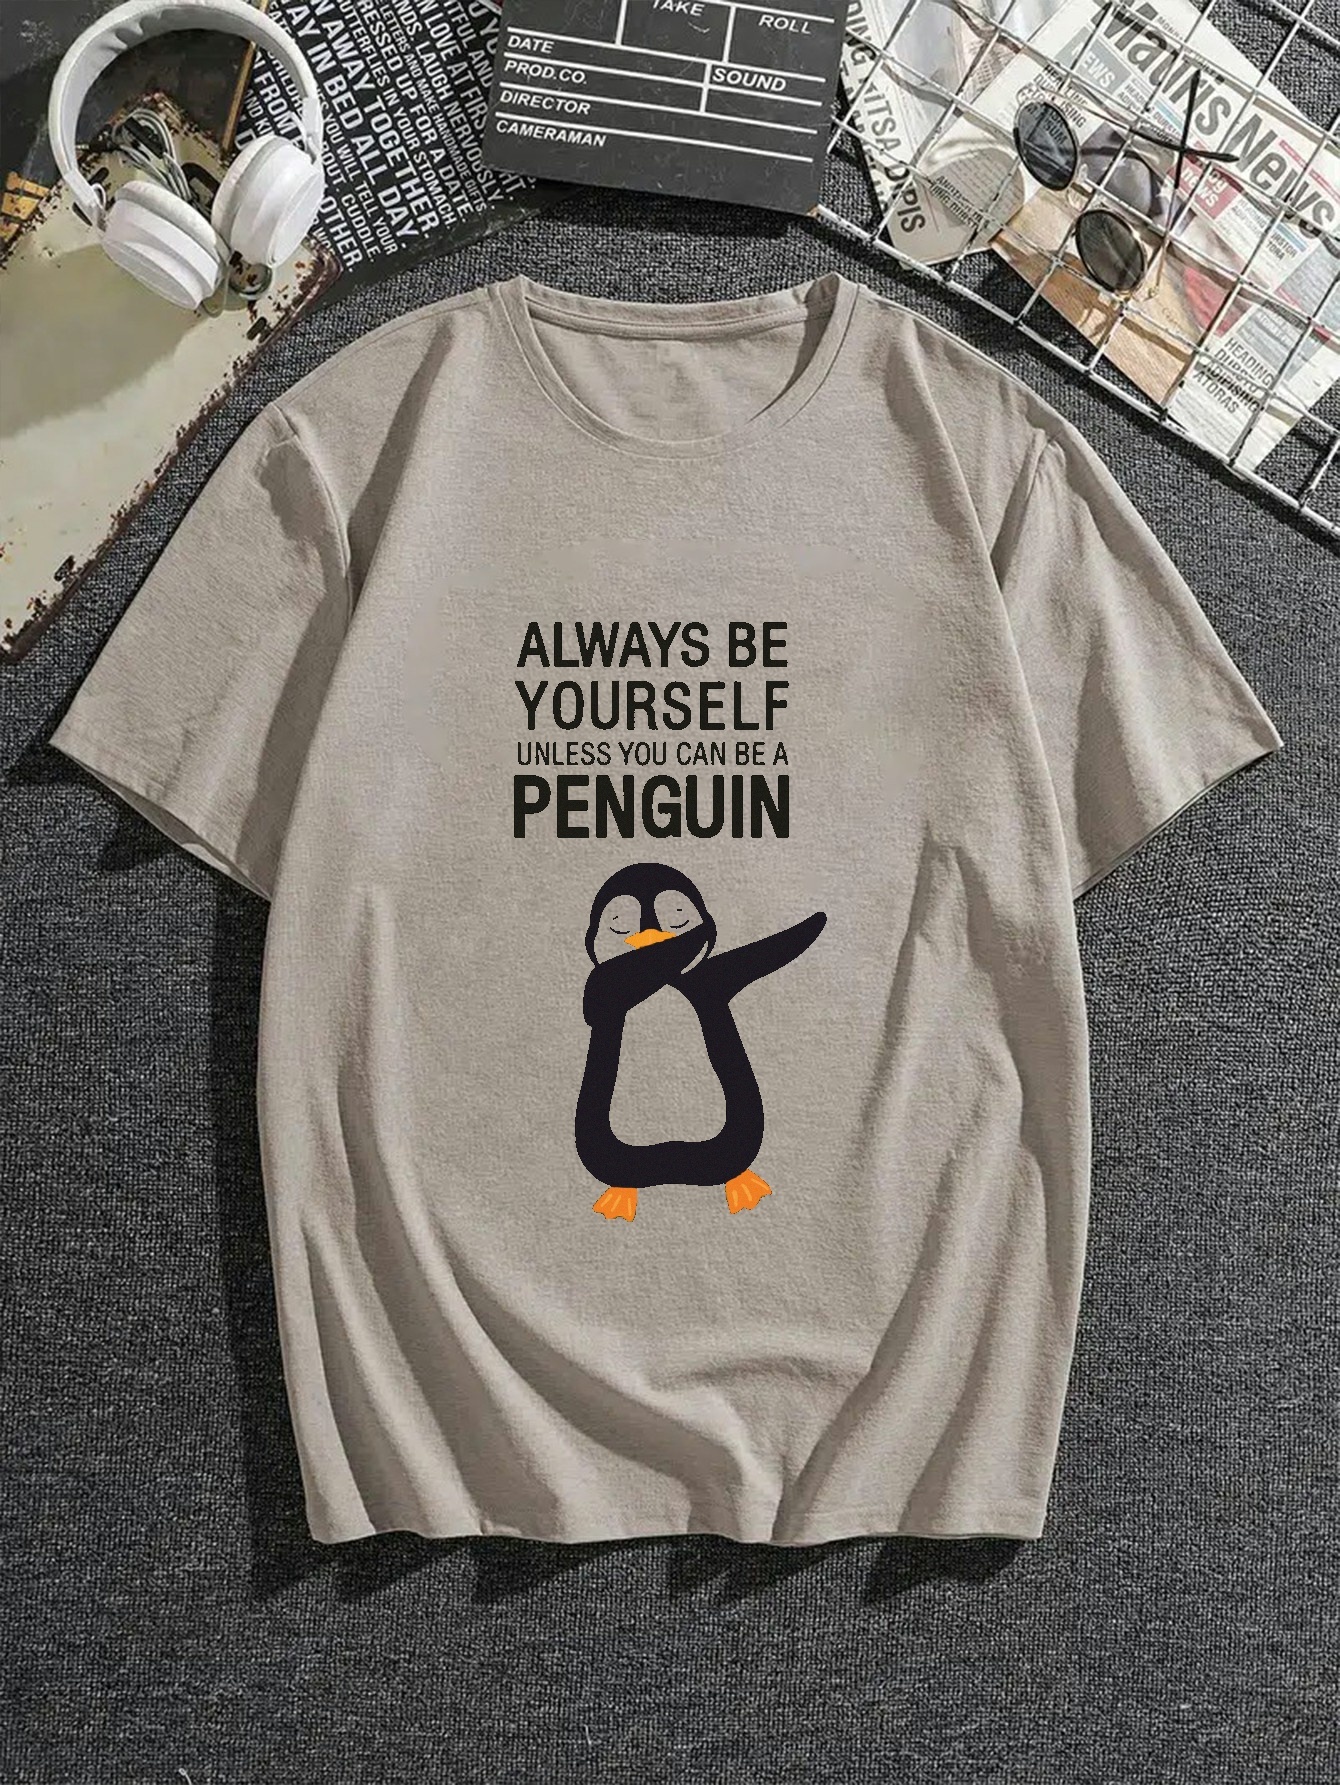 be yourself unless you can be a penguin